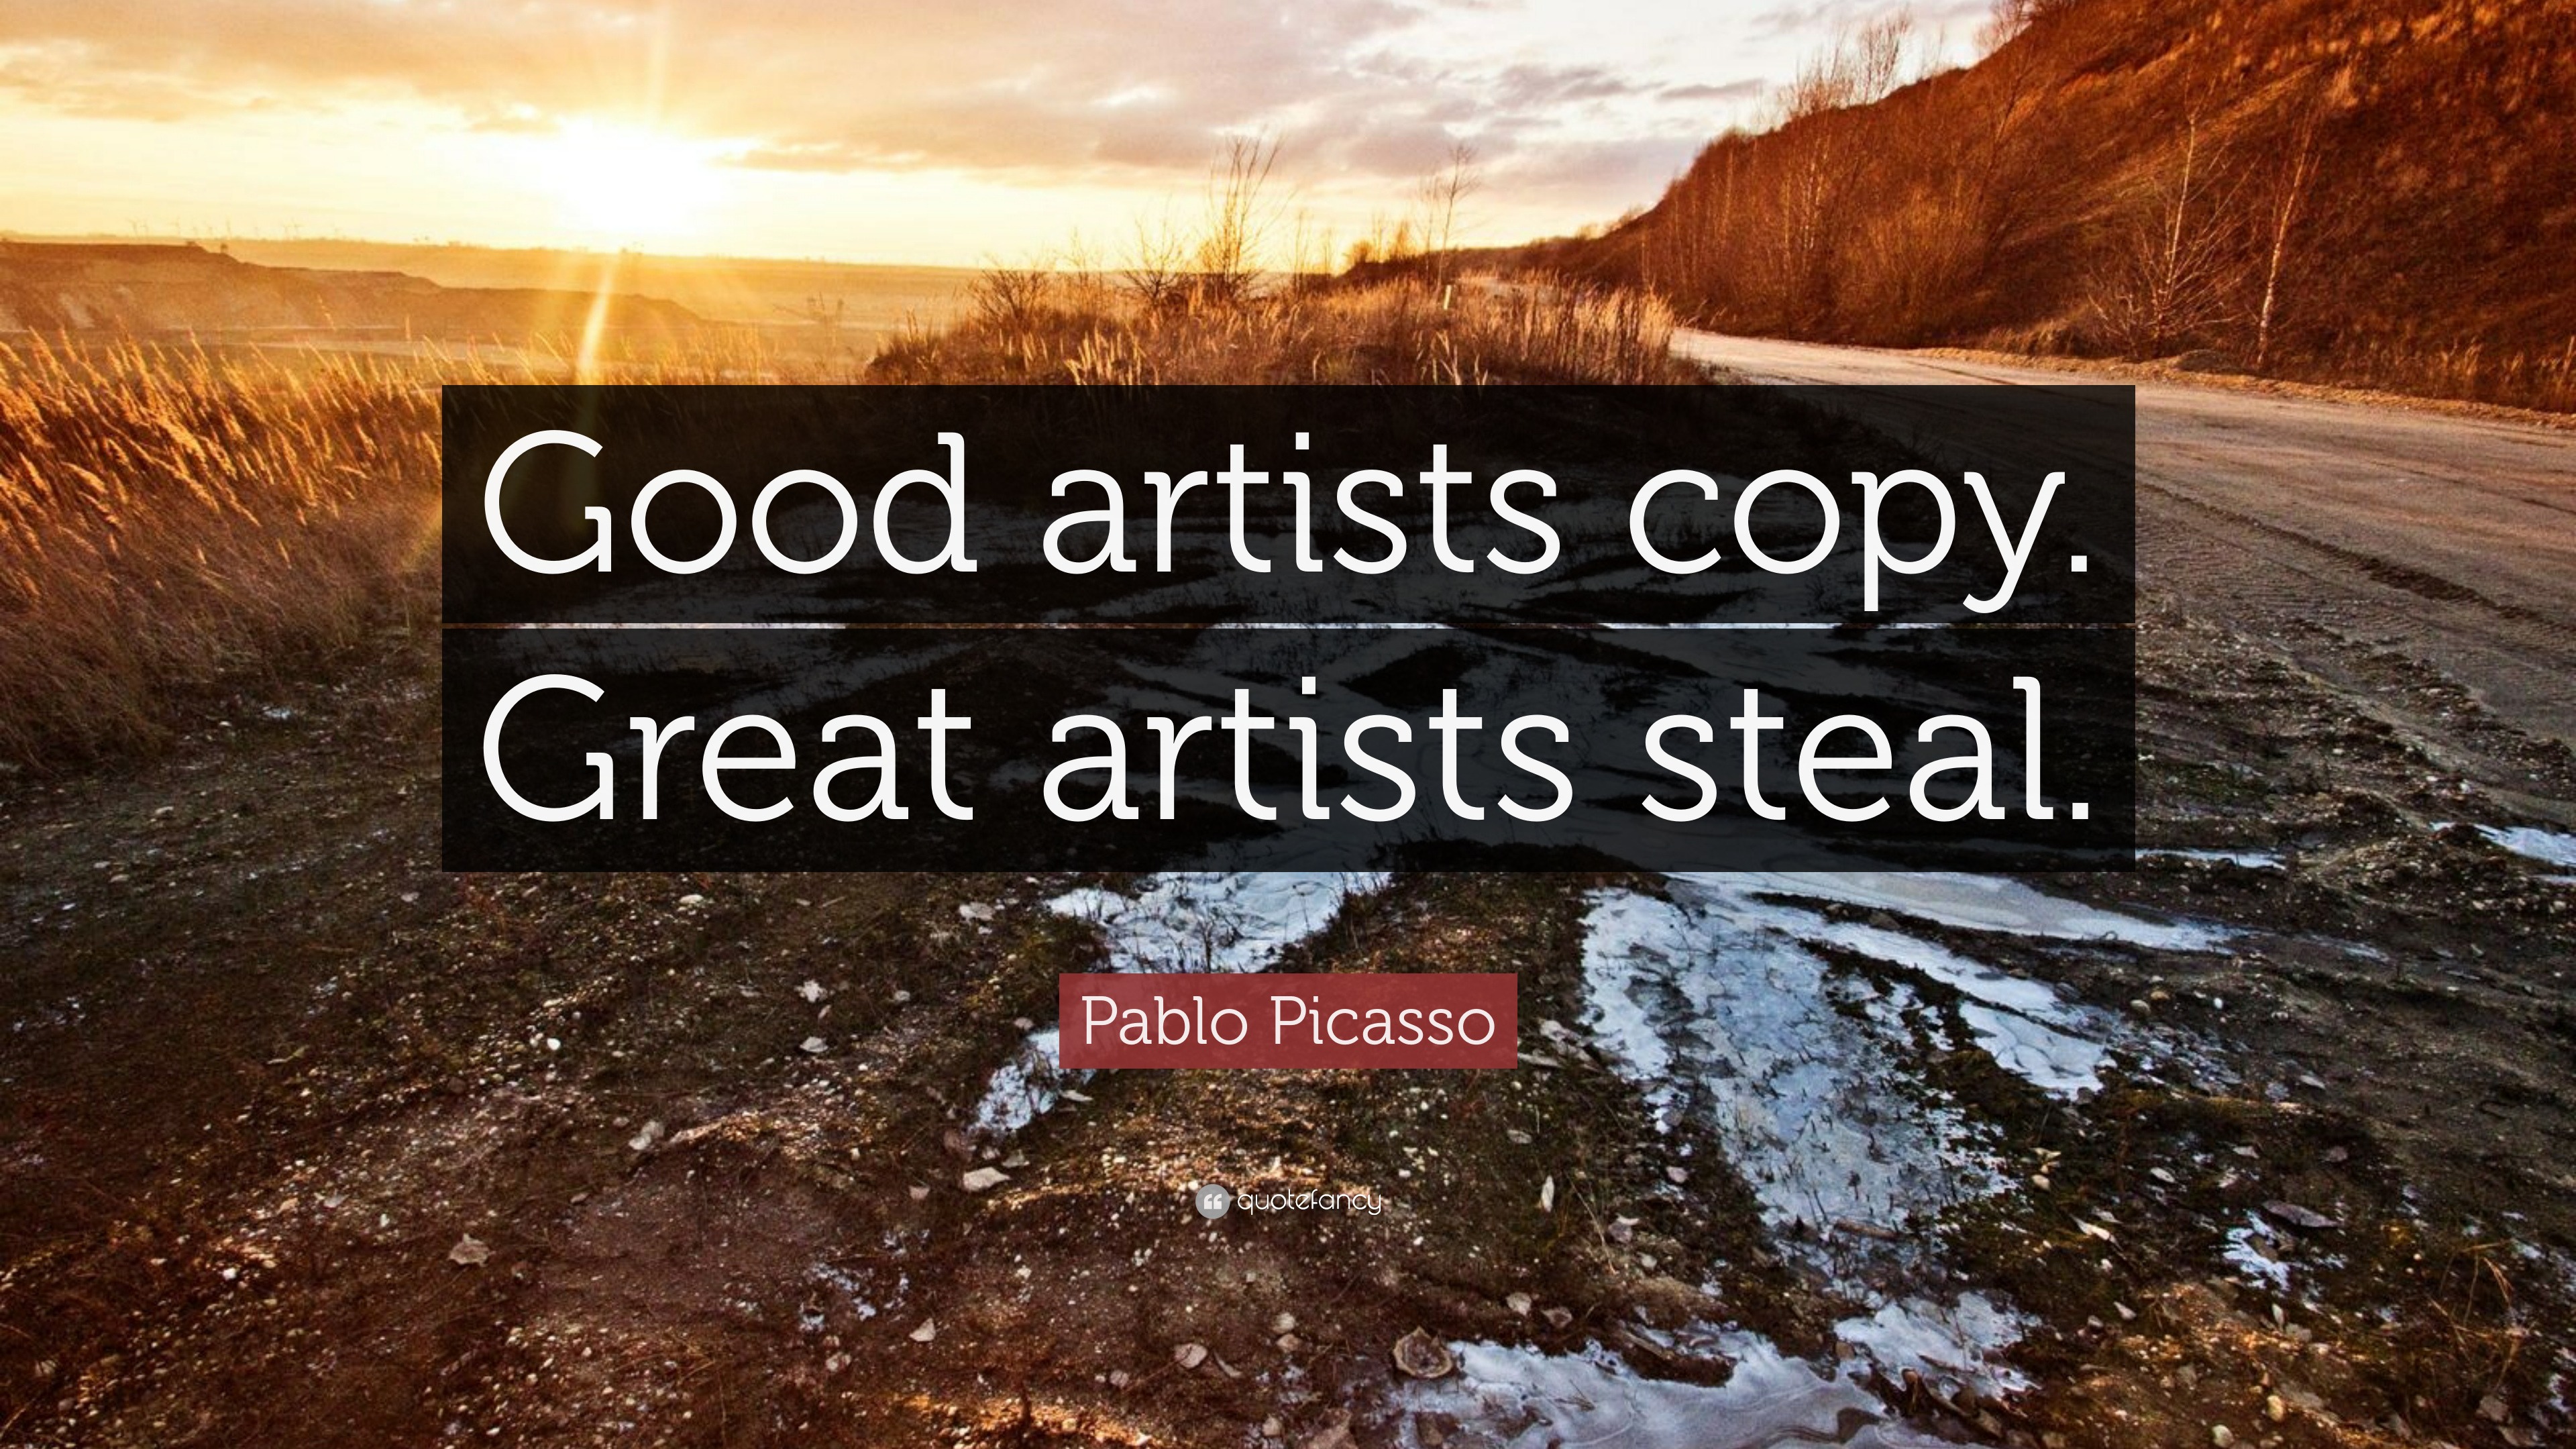 Pablo Picasso Quote: “Good artists copy. Great artists steal.” (23